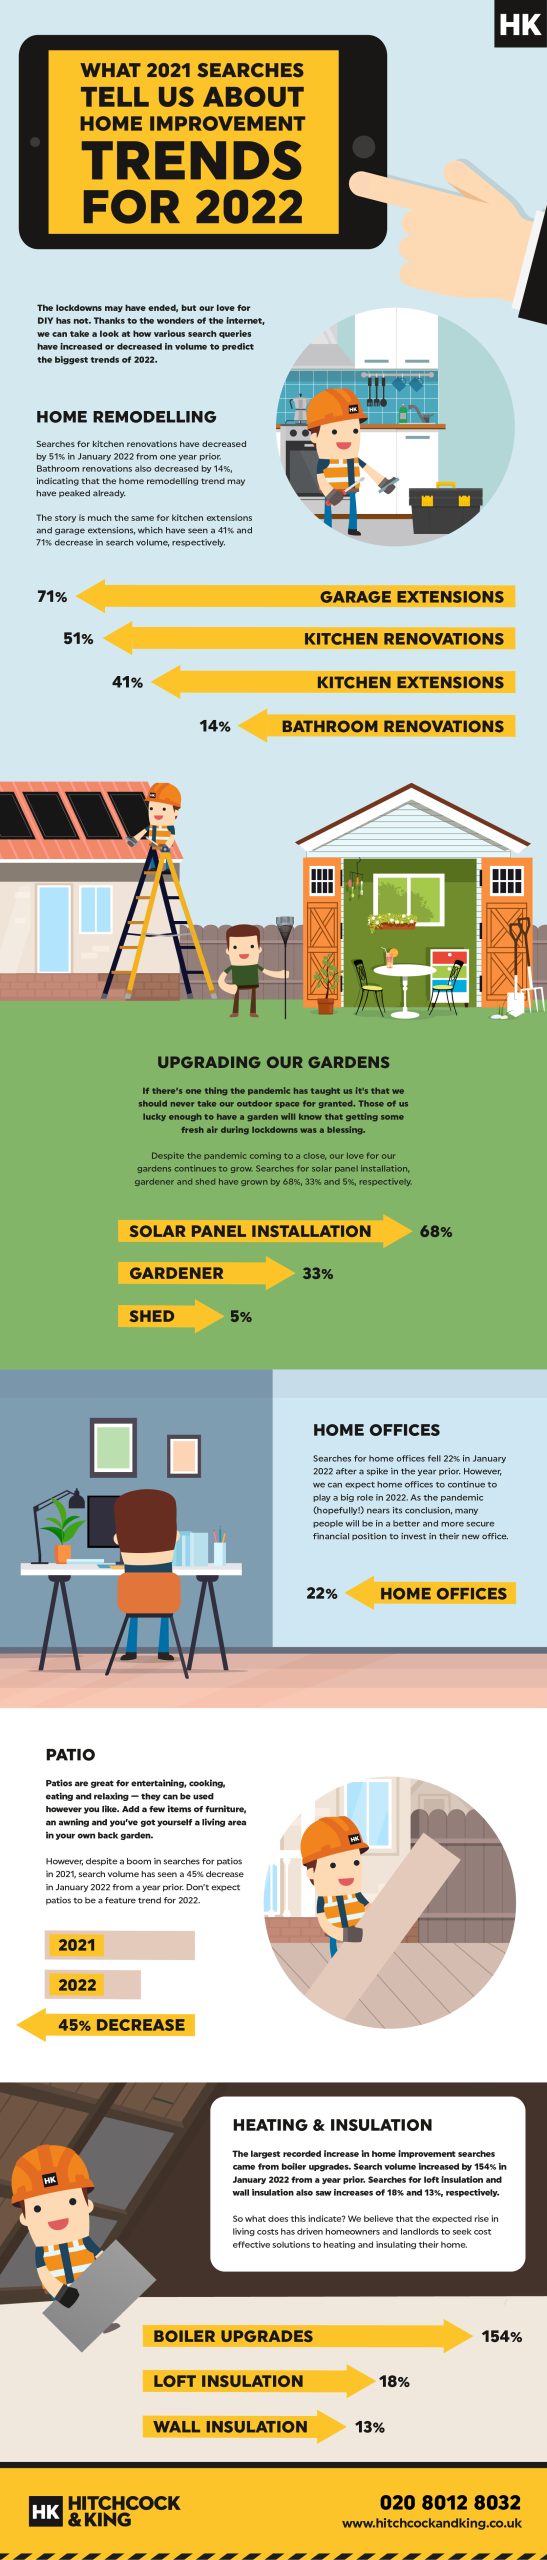 Home Improvement Trends for 2022 